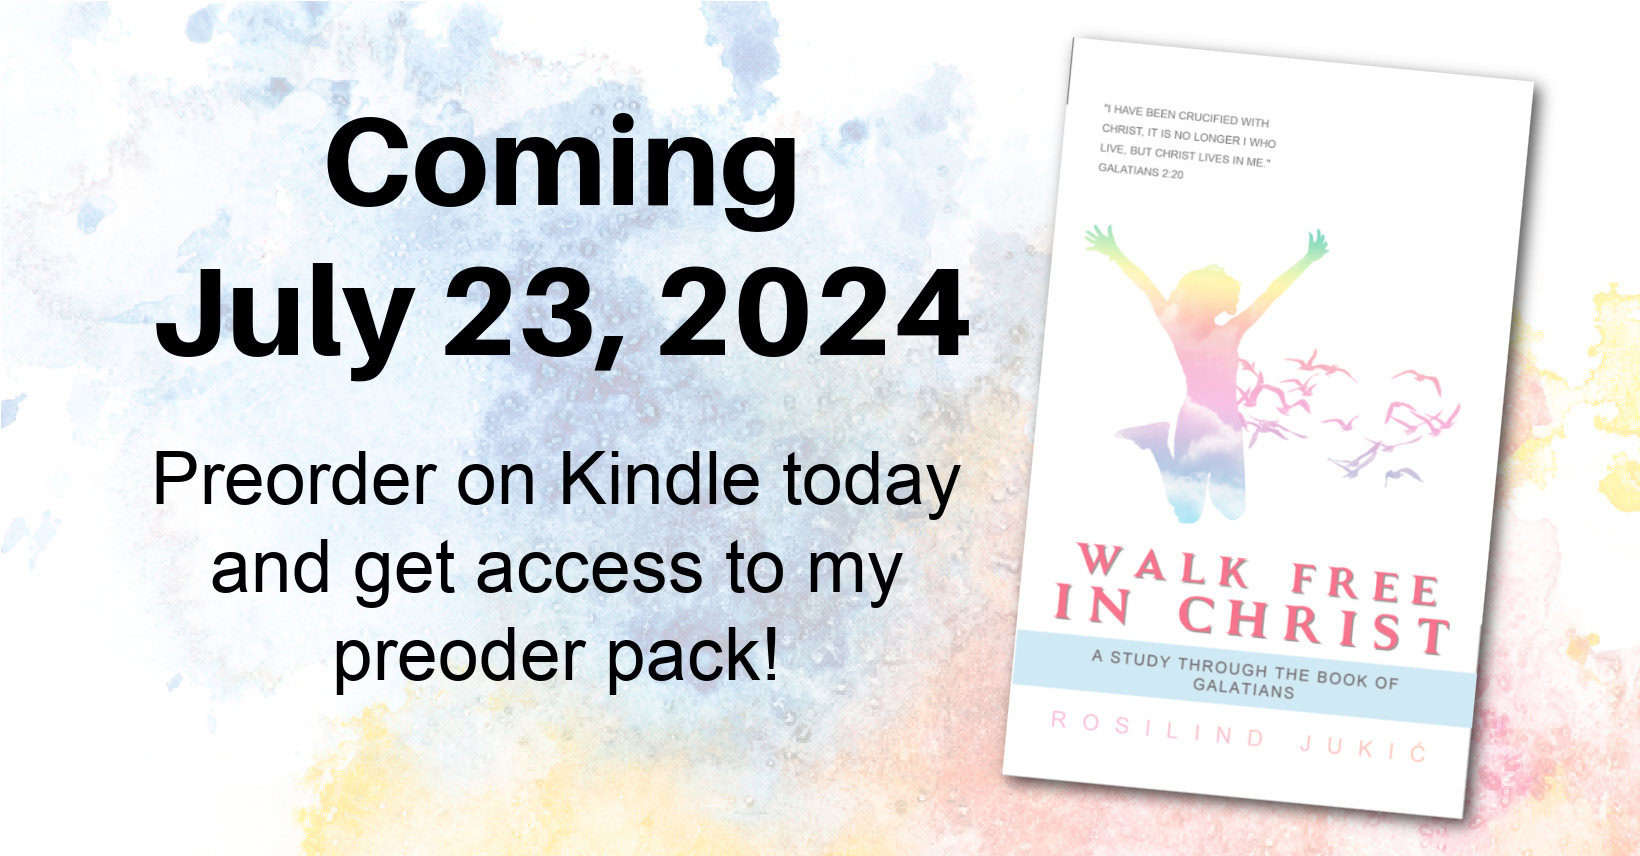 Announcing – My NEW BOOK: Walk Free in Christ!